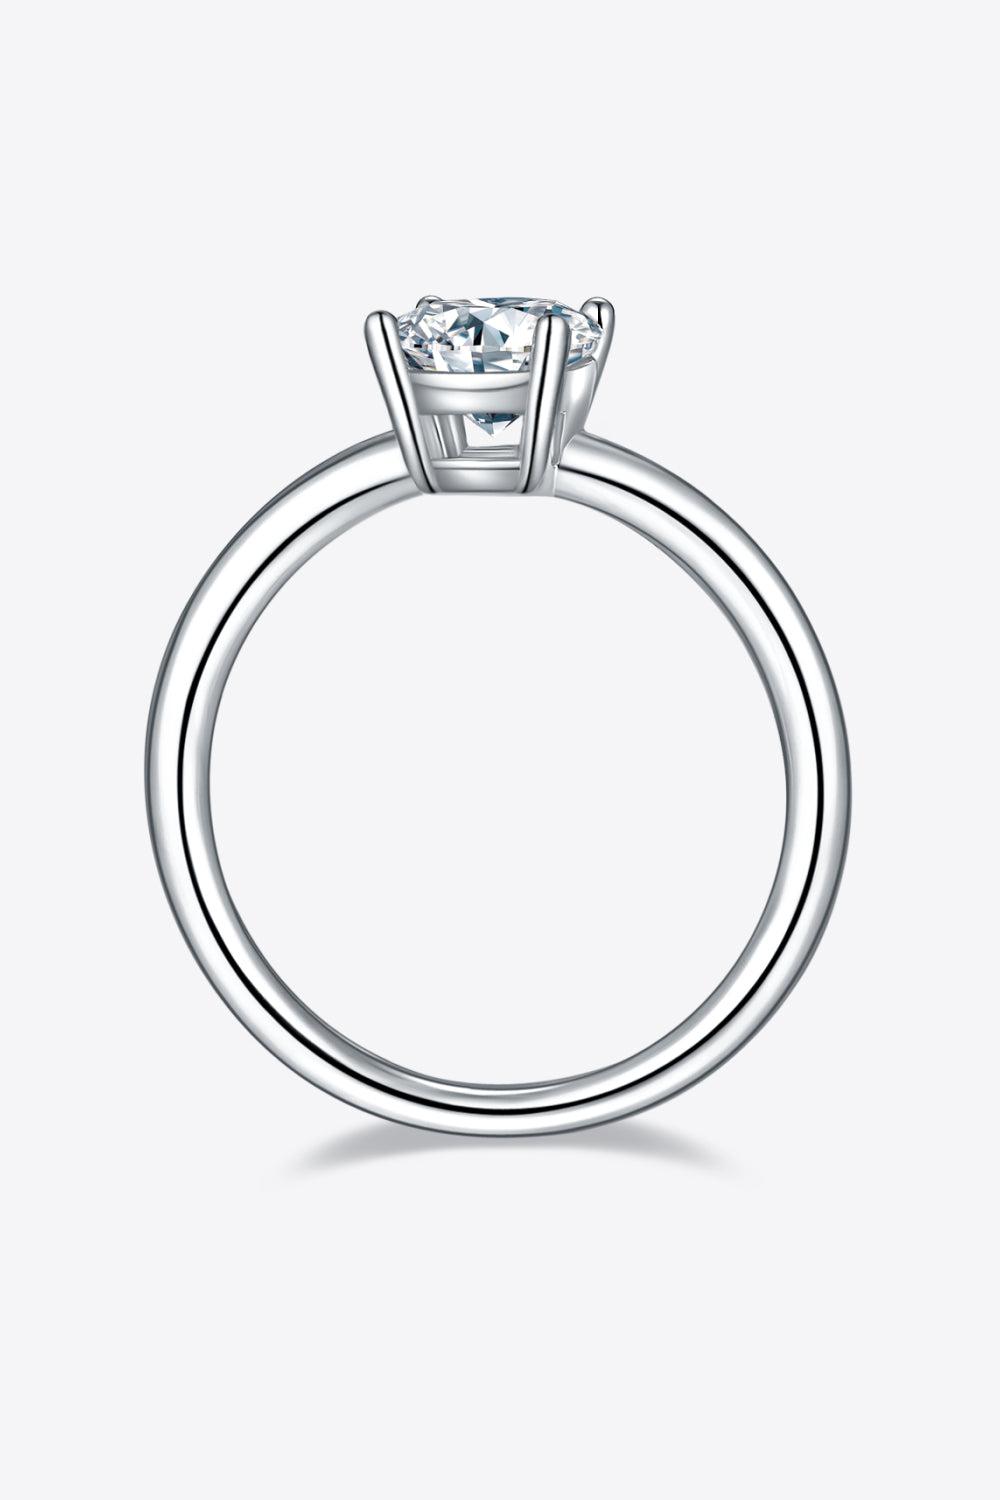 1 Carat Moissanite 925 Sterling Silver Solitaire Ring BLUE ZONE PLANET